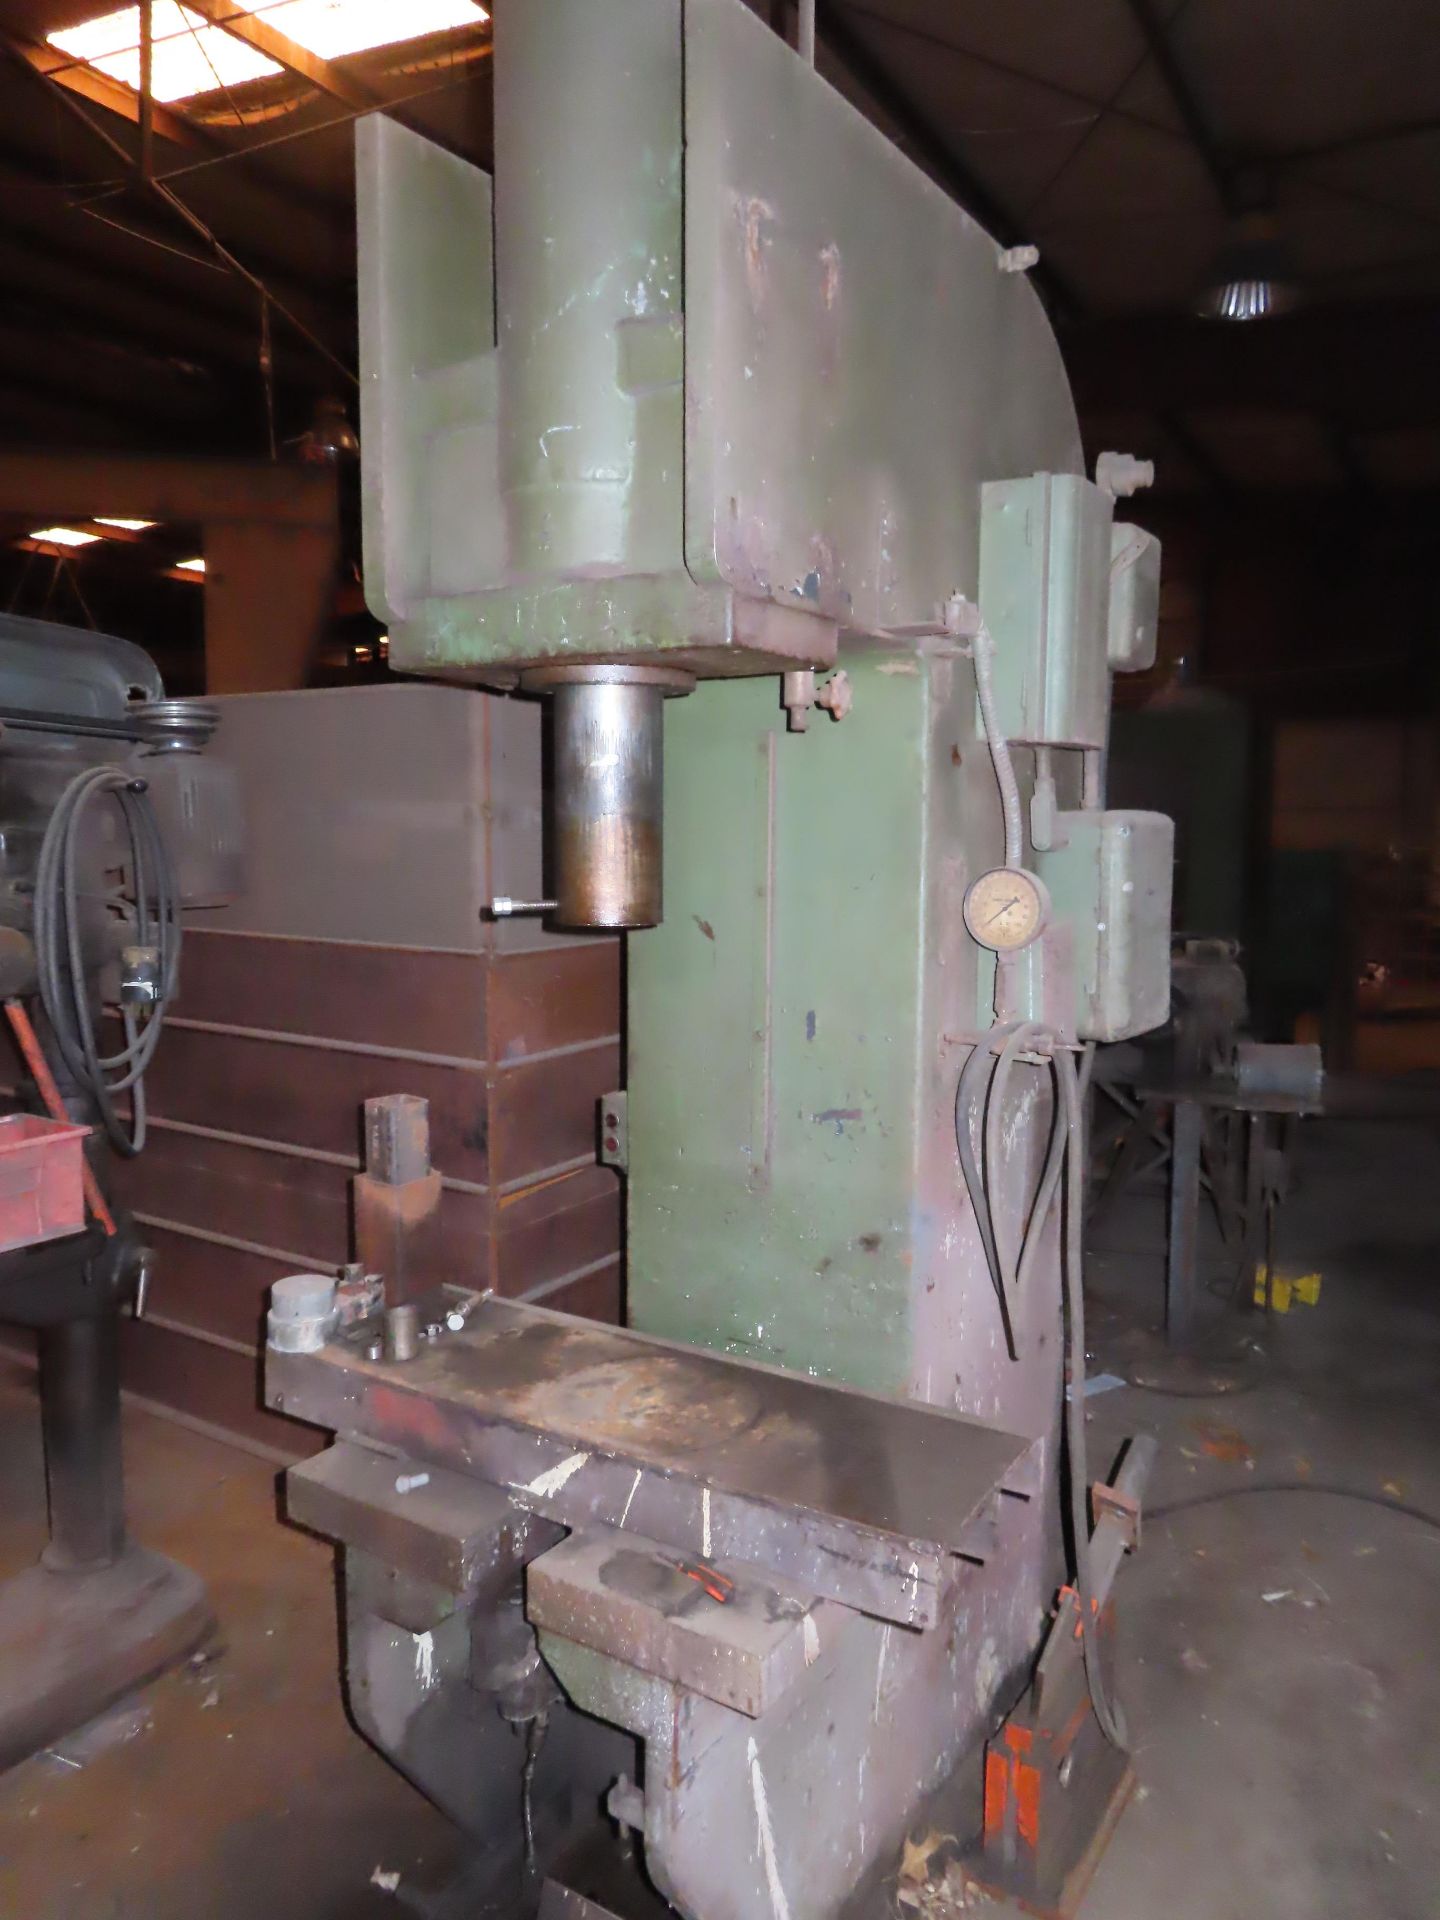 HYD. PUNCH PRESS, APPROX. 300 TON CAP., 15" THROAT, APPROX. 24" STROKEBLDG: 2 - HYD. PUNCH PRESS, AP - Image 4 of 4